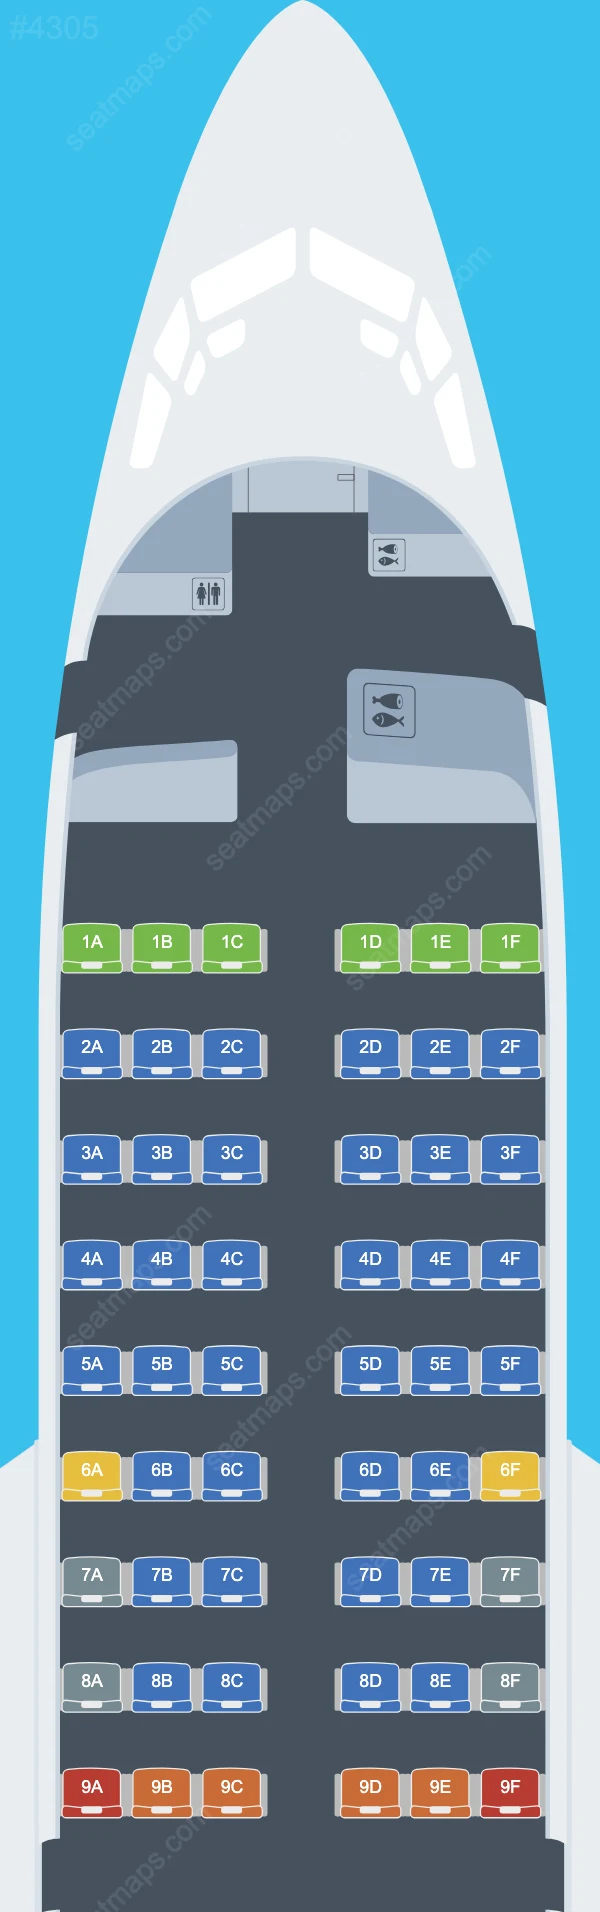 Air North Boeing 737 Seat Maps 737-500